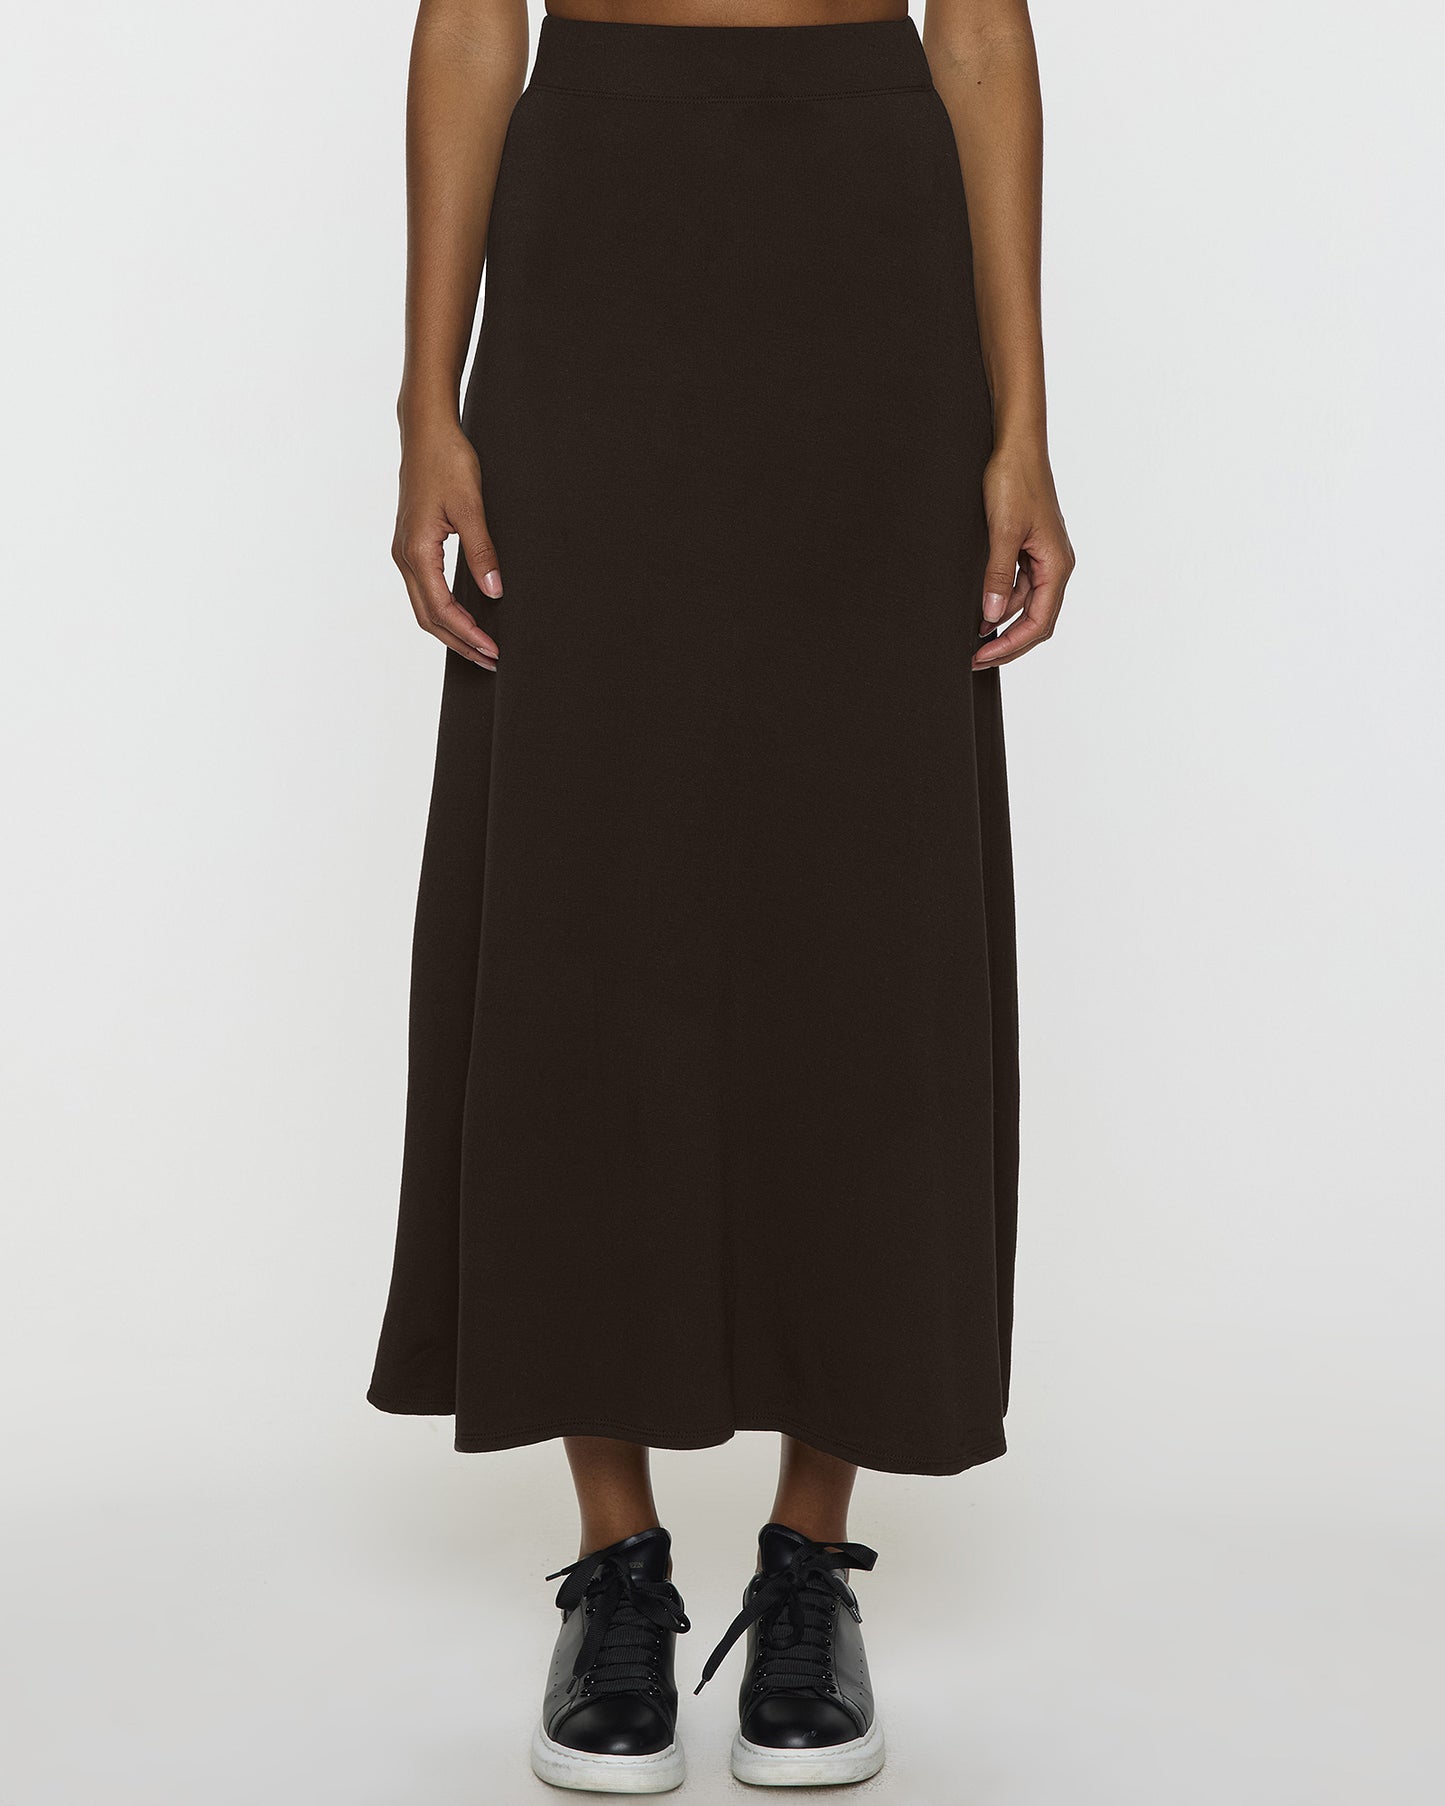 Coco | The Long A-Line Skirt Front